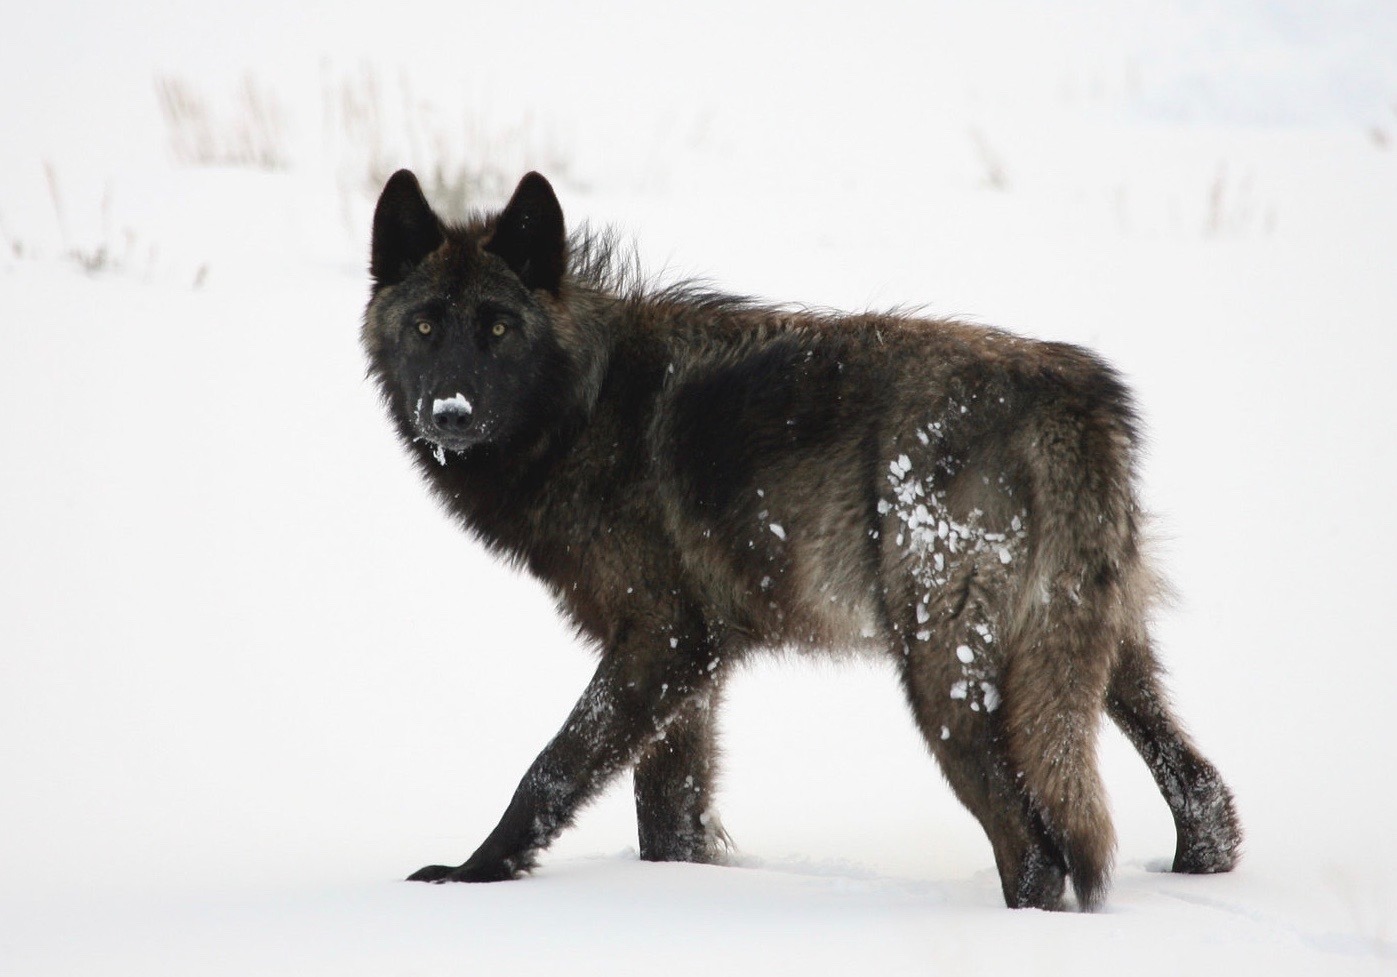 Photo of Yellowstone wolf in Lamar Valley courtesy Jim Peaco/NPS